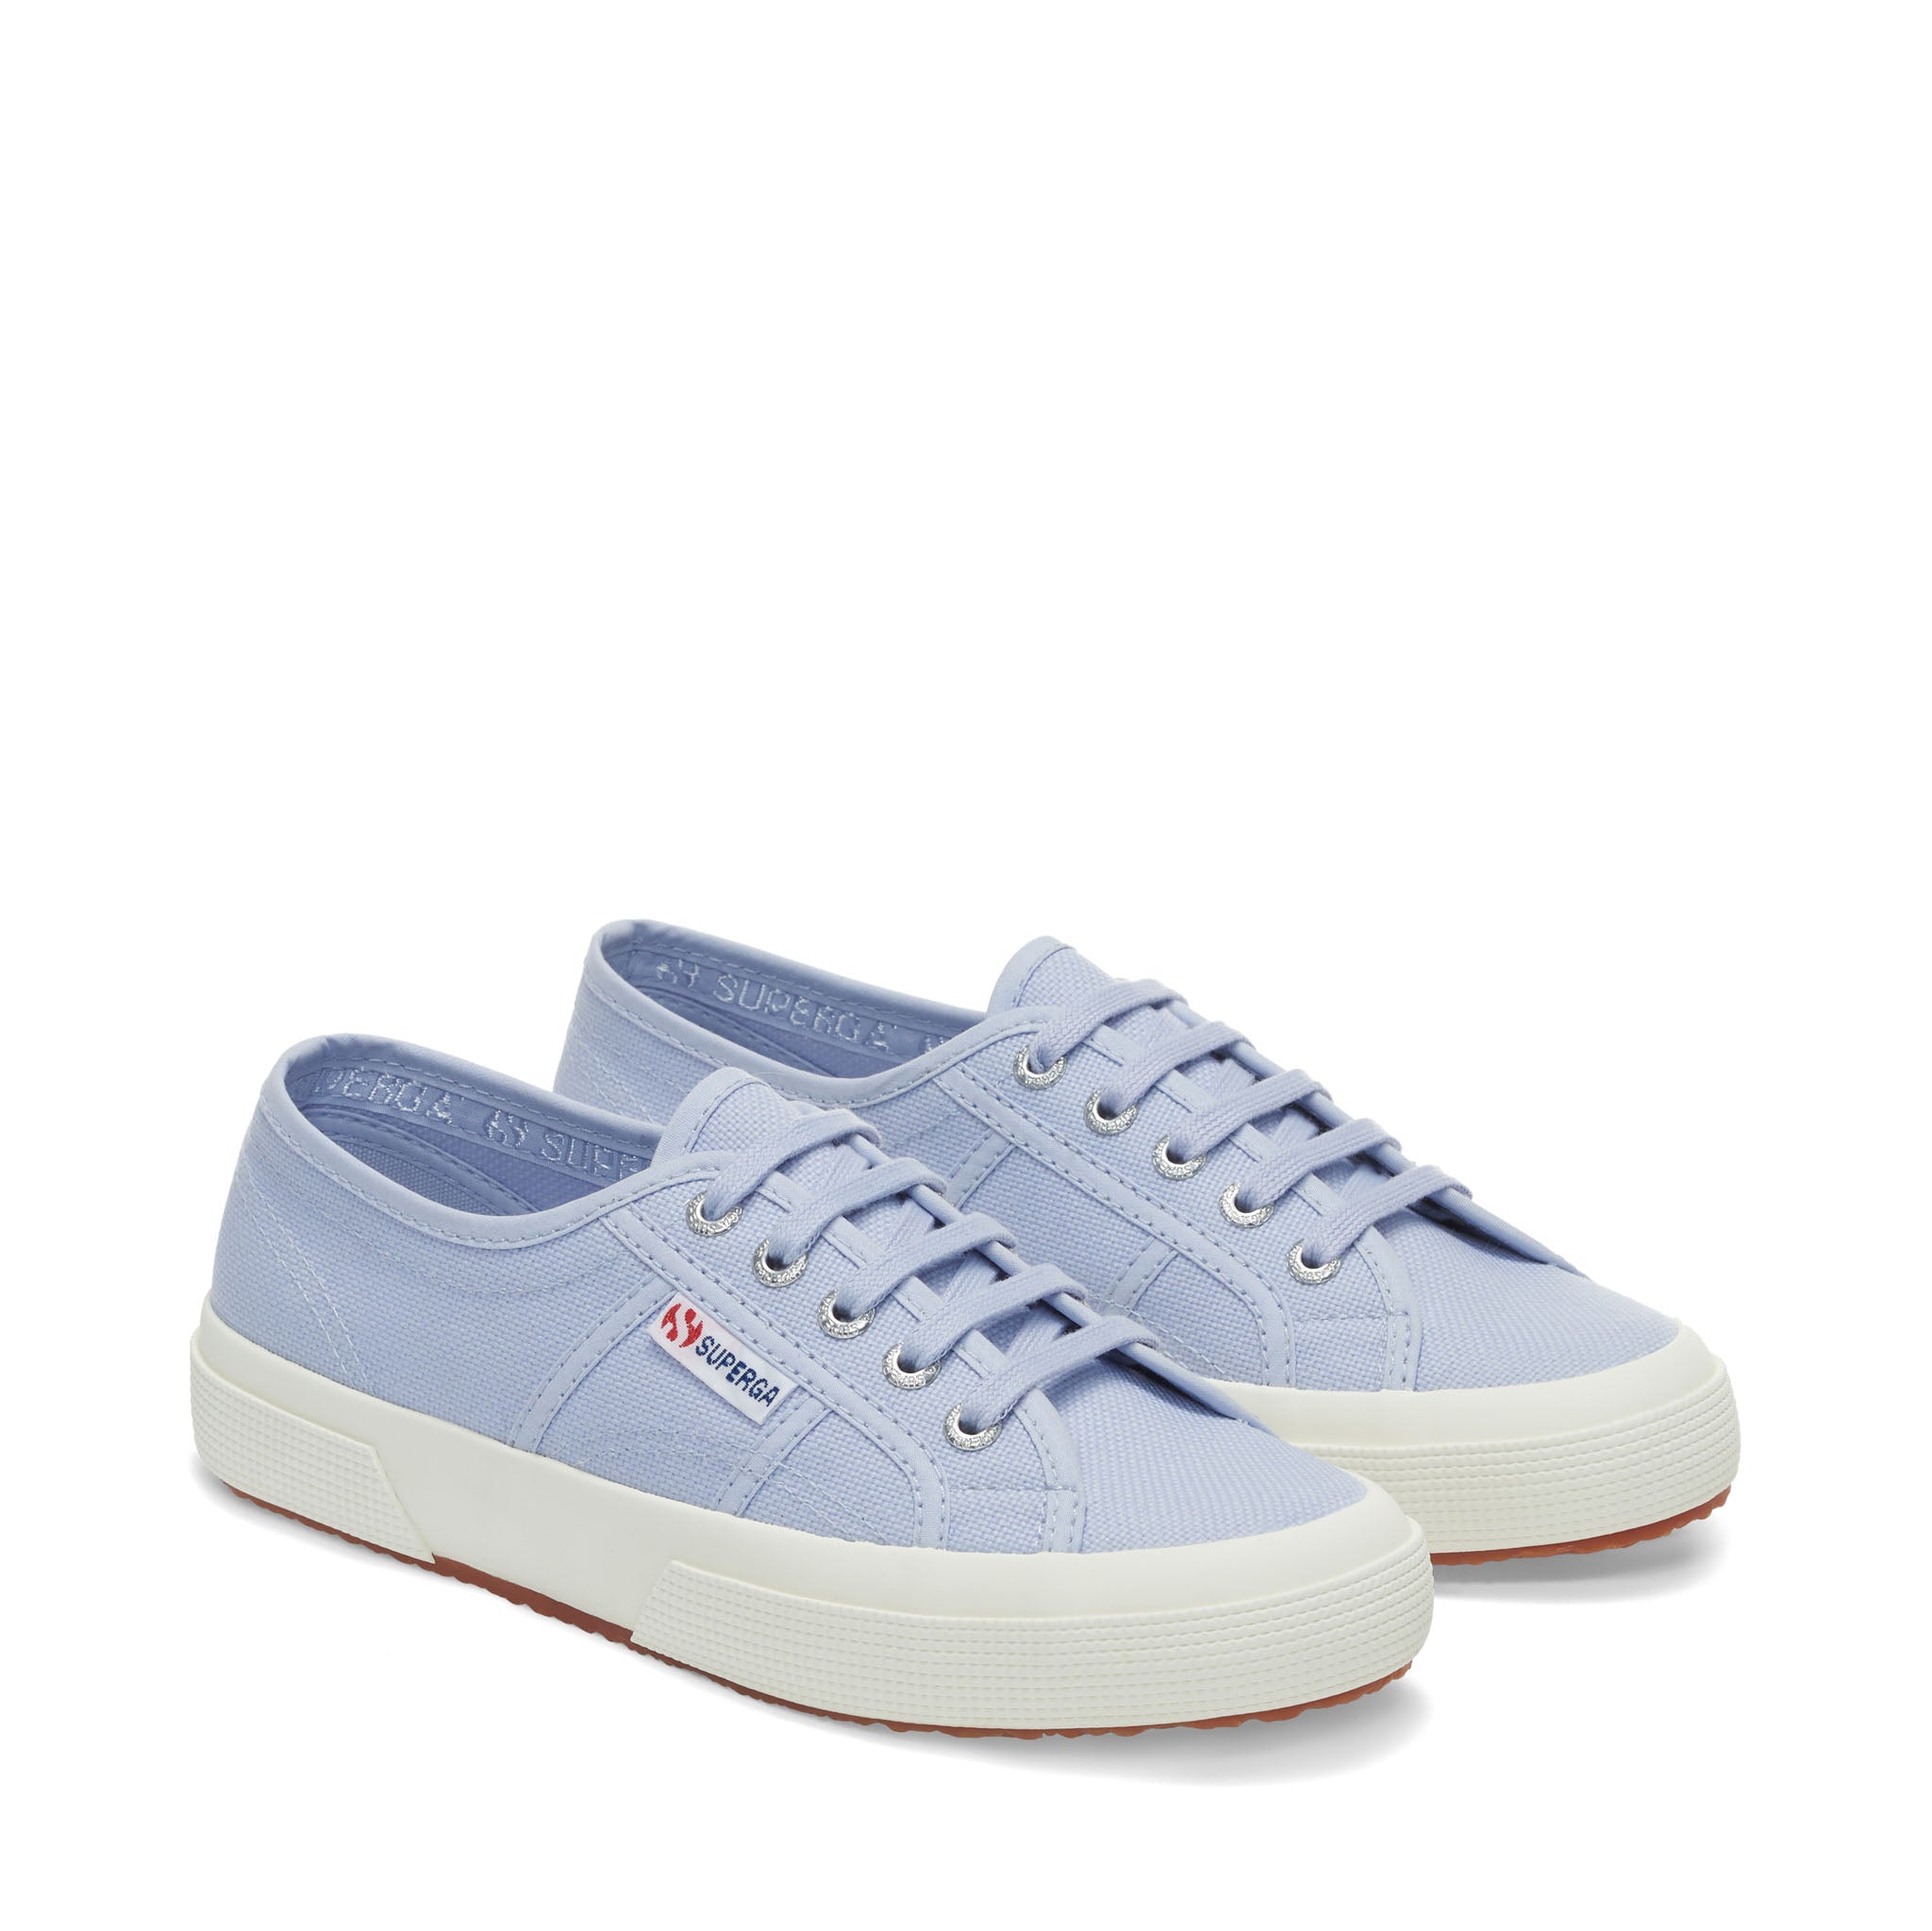 Superga 2750 Cotu Classic Sneakers - Light Violet. Front view.